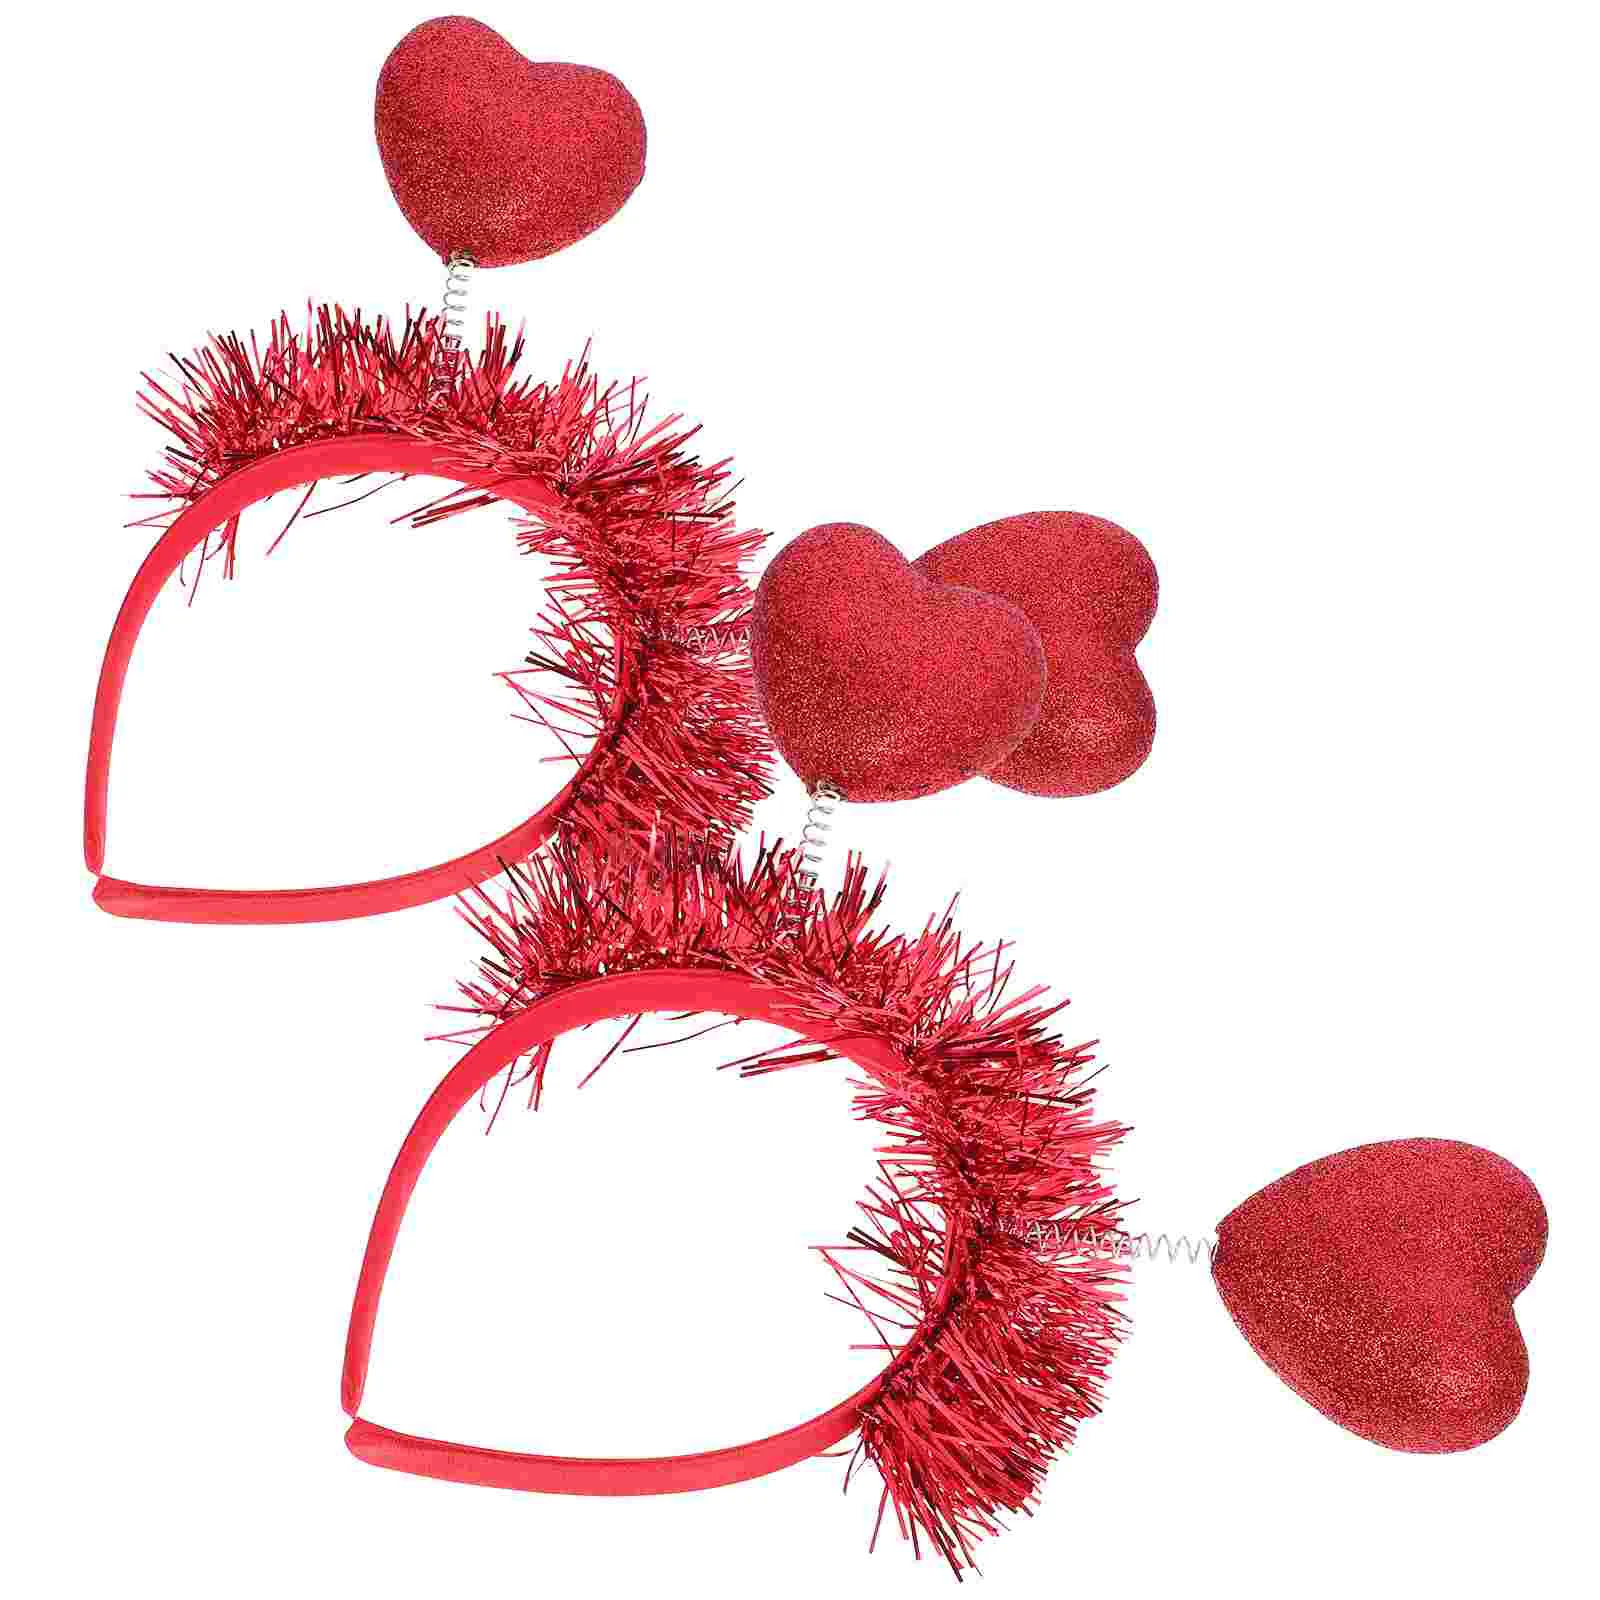 2 Pcs Love Headband Props Valentines Day Party Hairband Wedding Decorations Photography Headpiece Heart-shaped newborn baby girls photography props nordic florals tassel hat pillow blanket set blanket decorations studio shooting photo prop